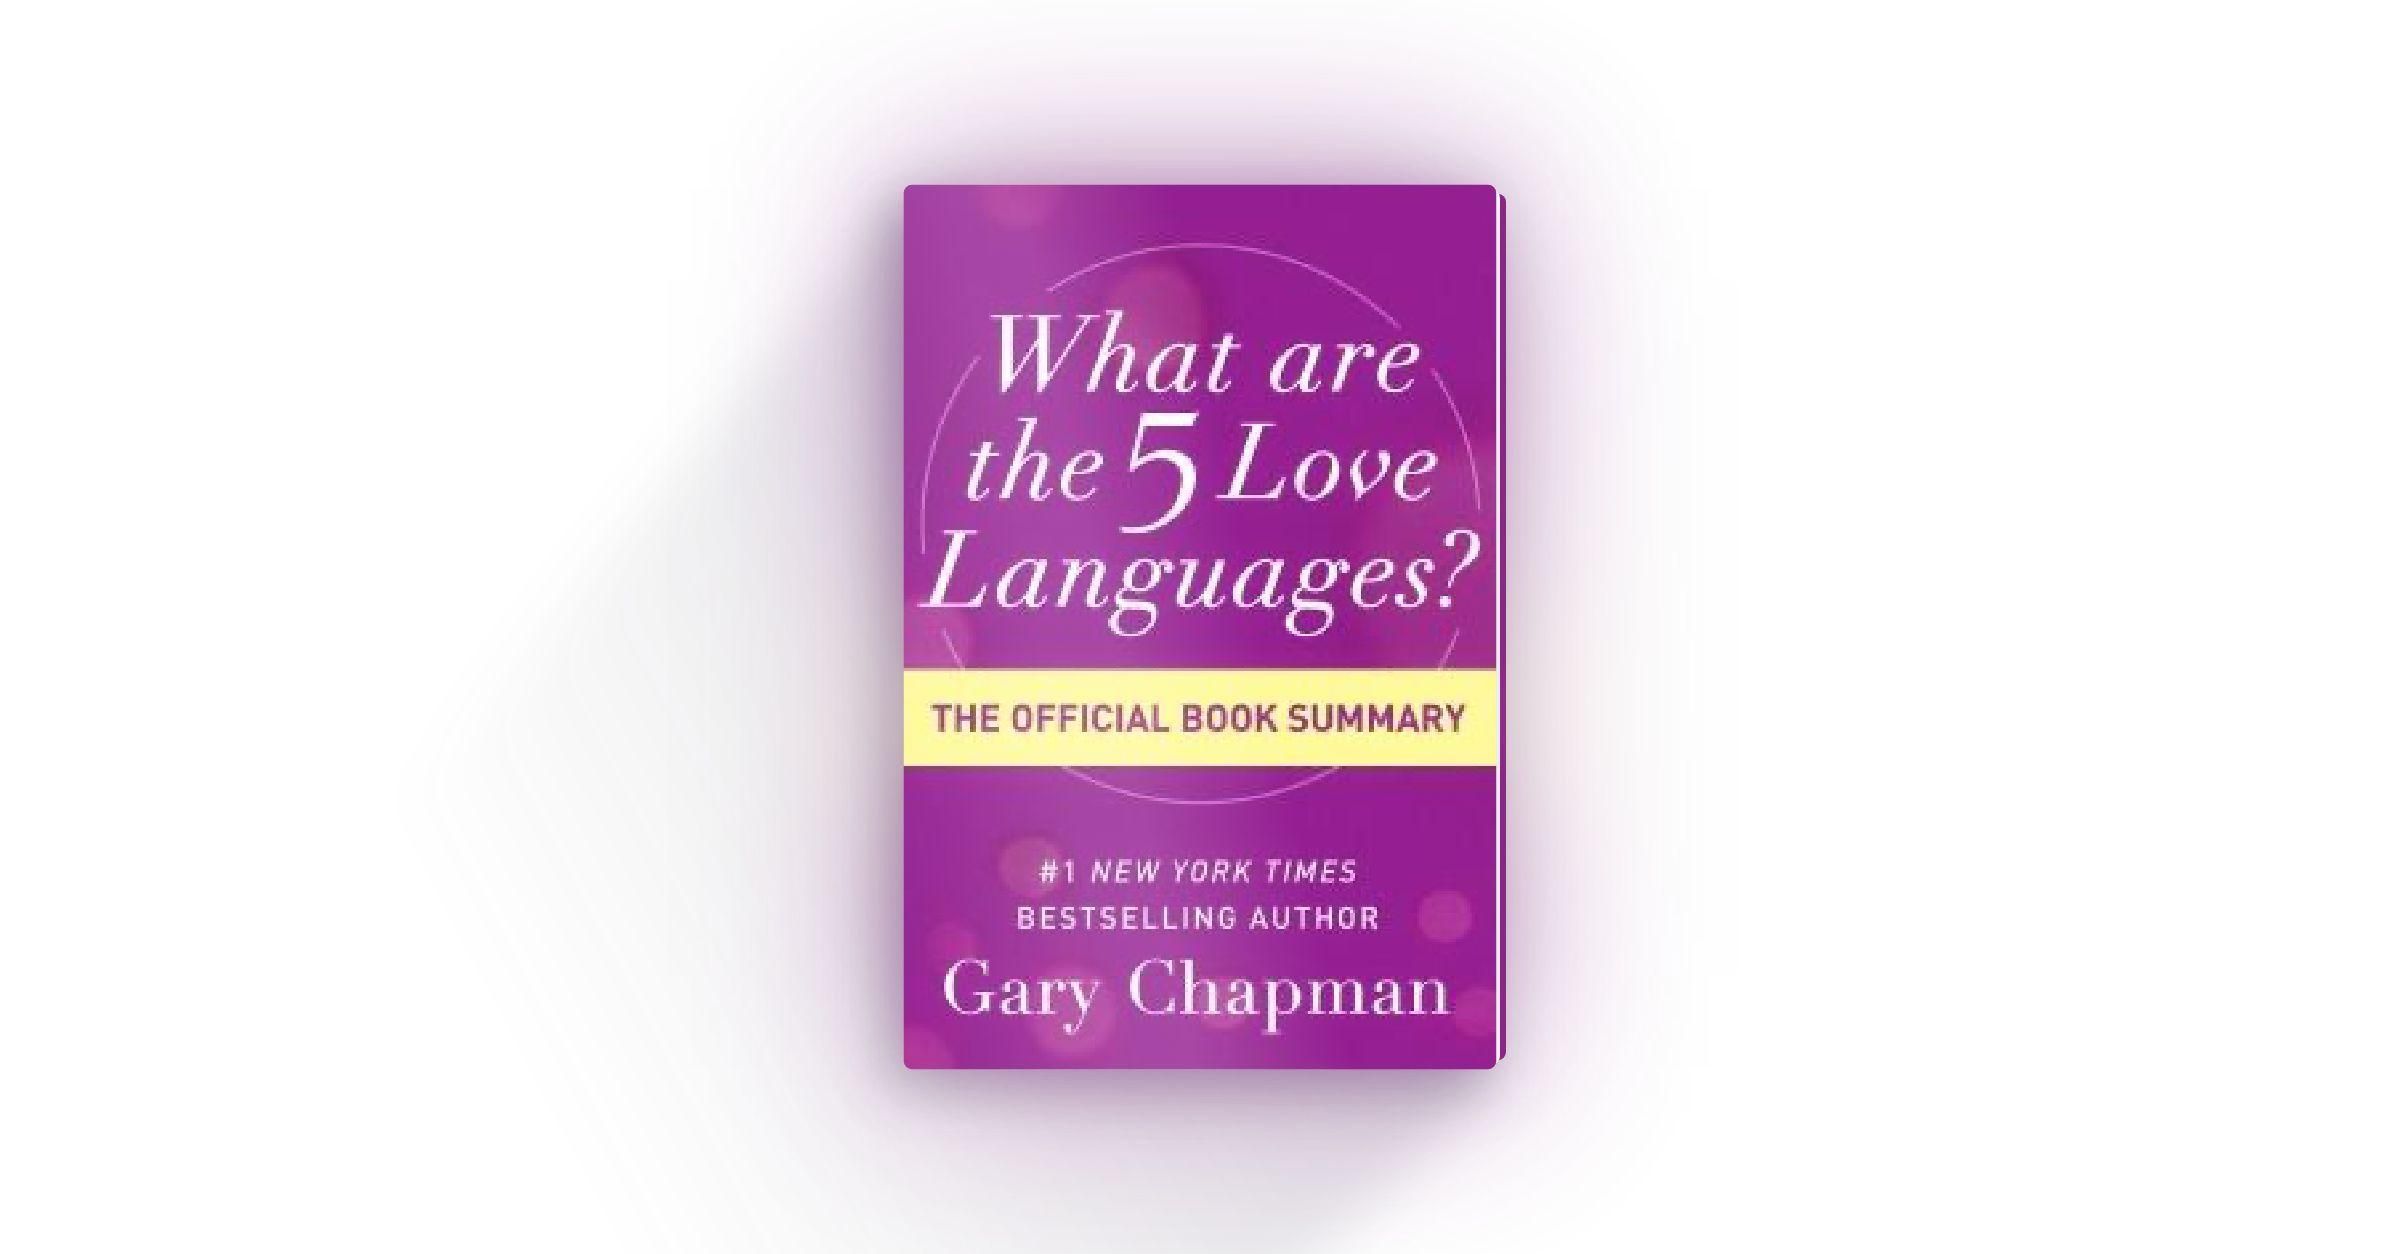 dr-chapman-love-language-test-book-review-kaleighchace